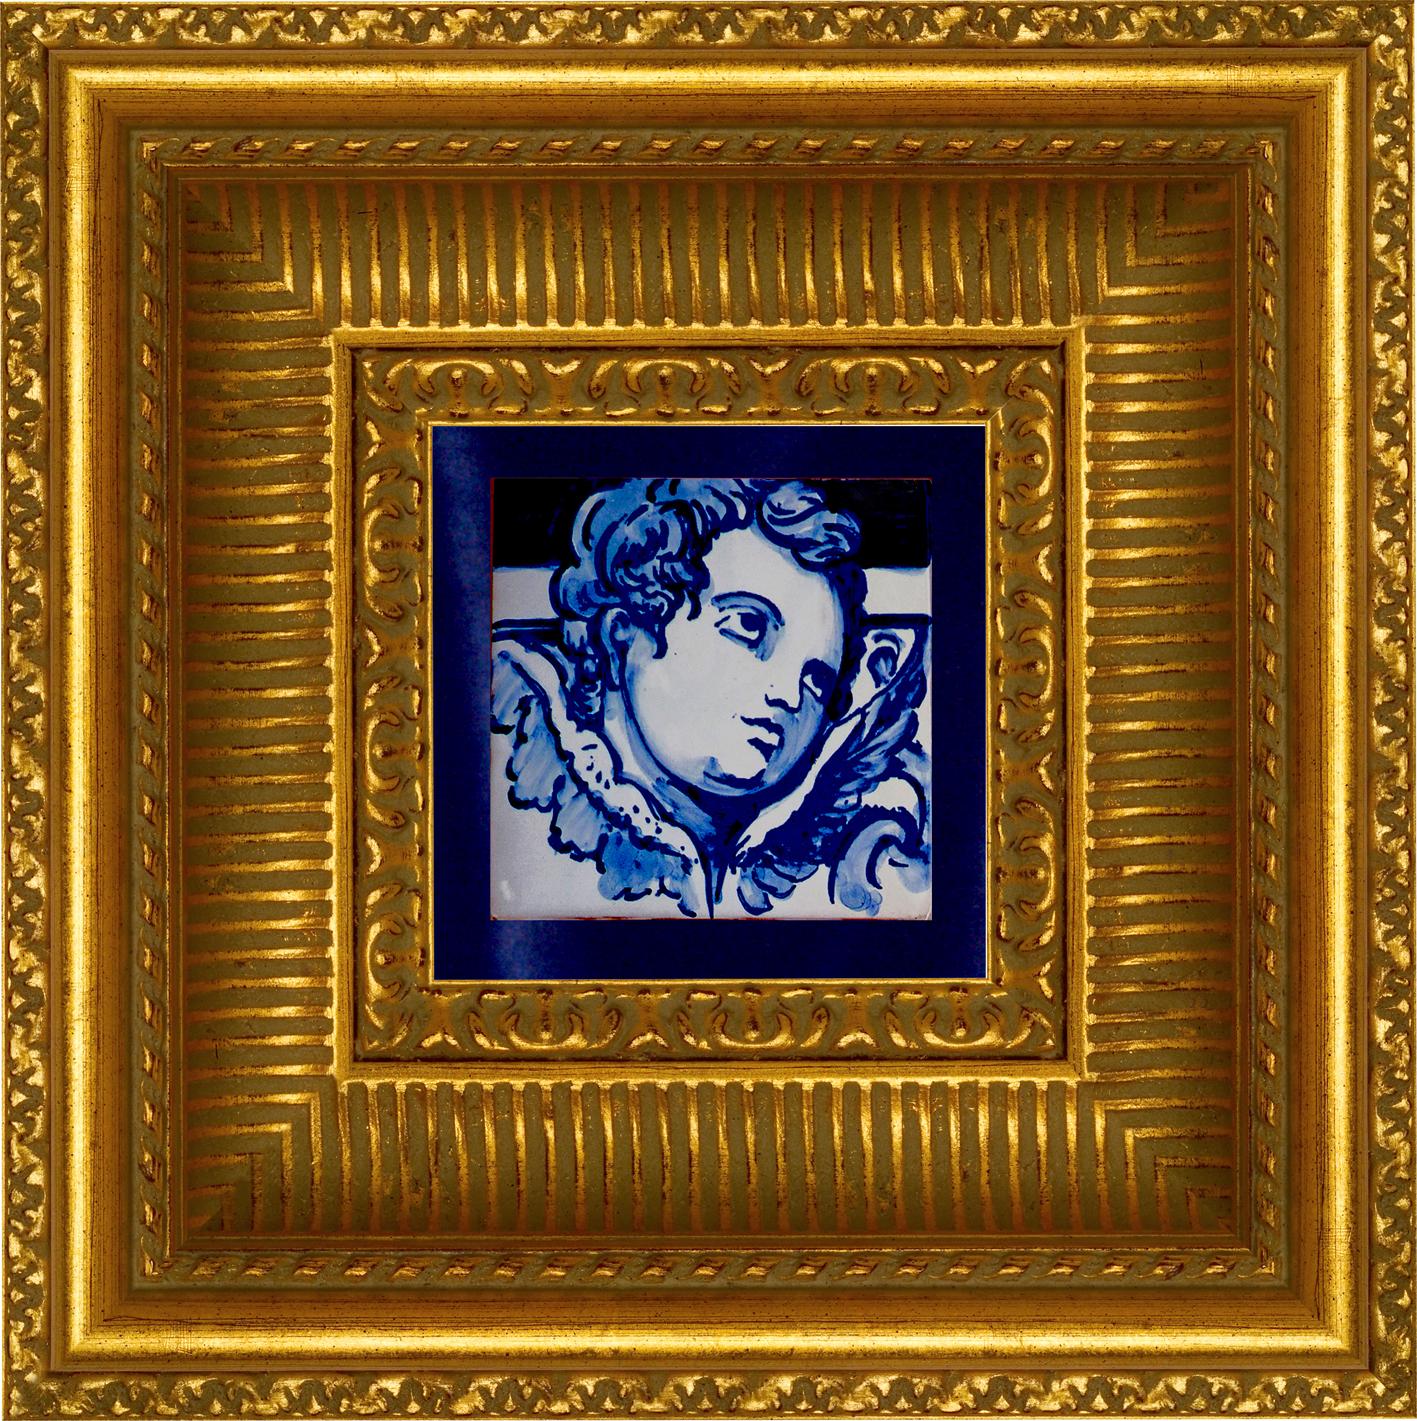 Gorgeous blue hand-painted Baroque cherub or angel 18th century style Portuguese ceramic tile/azulejo
The tile painted in cobalt blue over white in typical 18th century Portugal set the taste for monumental ceramic tile applications in churches and